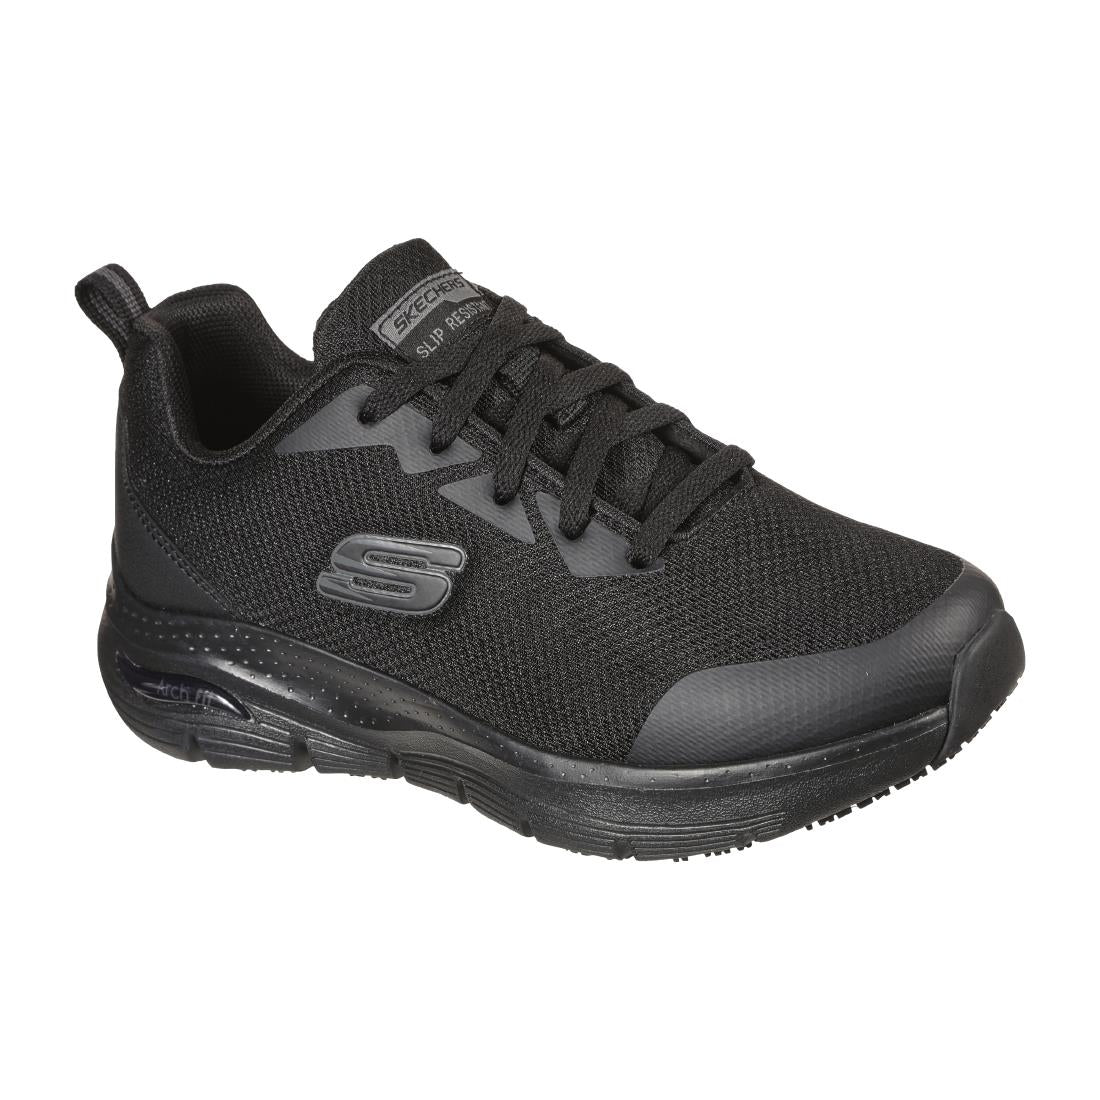 BB671-37 Skechers Womens Slip Resistant Arch Fit Trainer Size 37 JD Catering Equipment Solutions Ltd